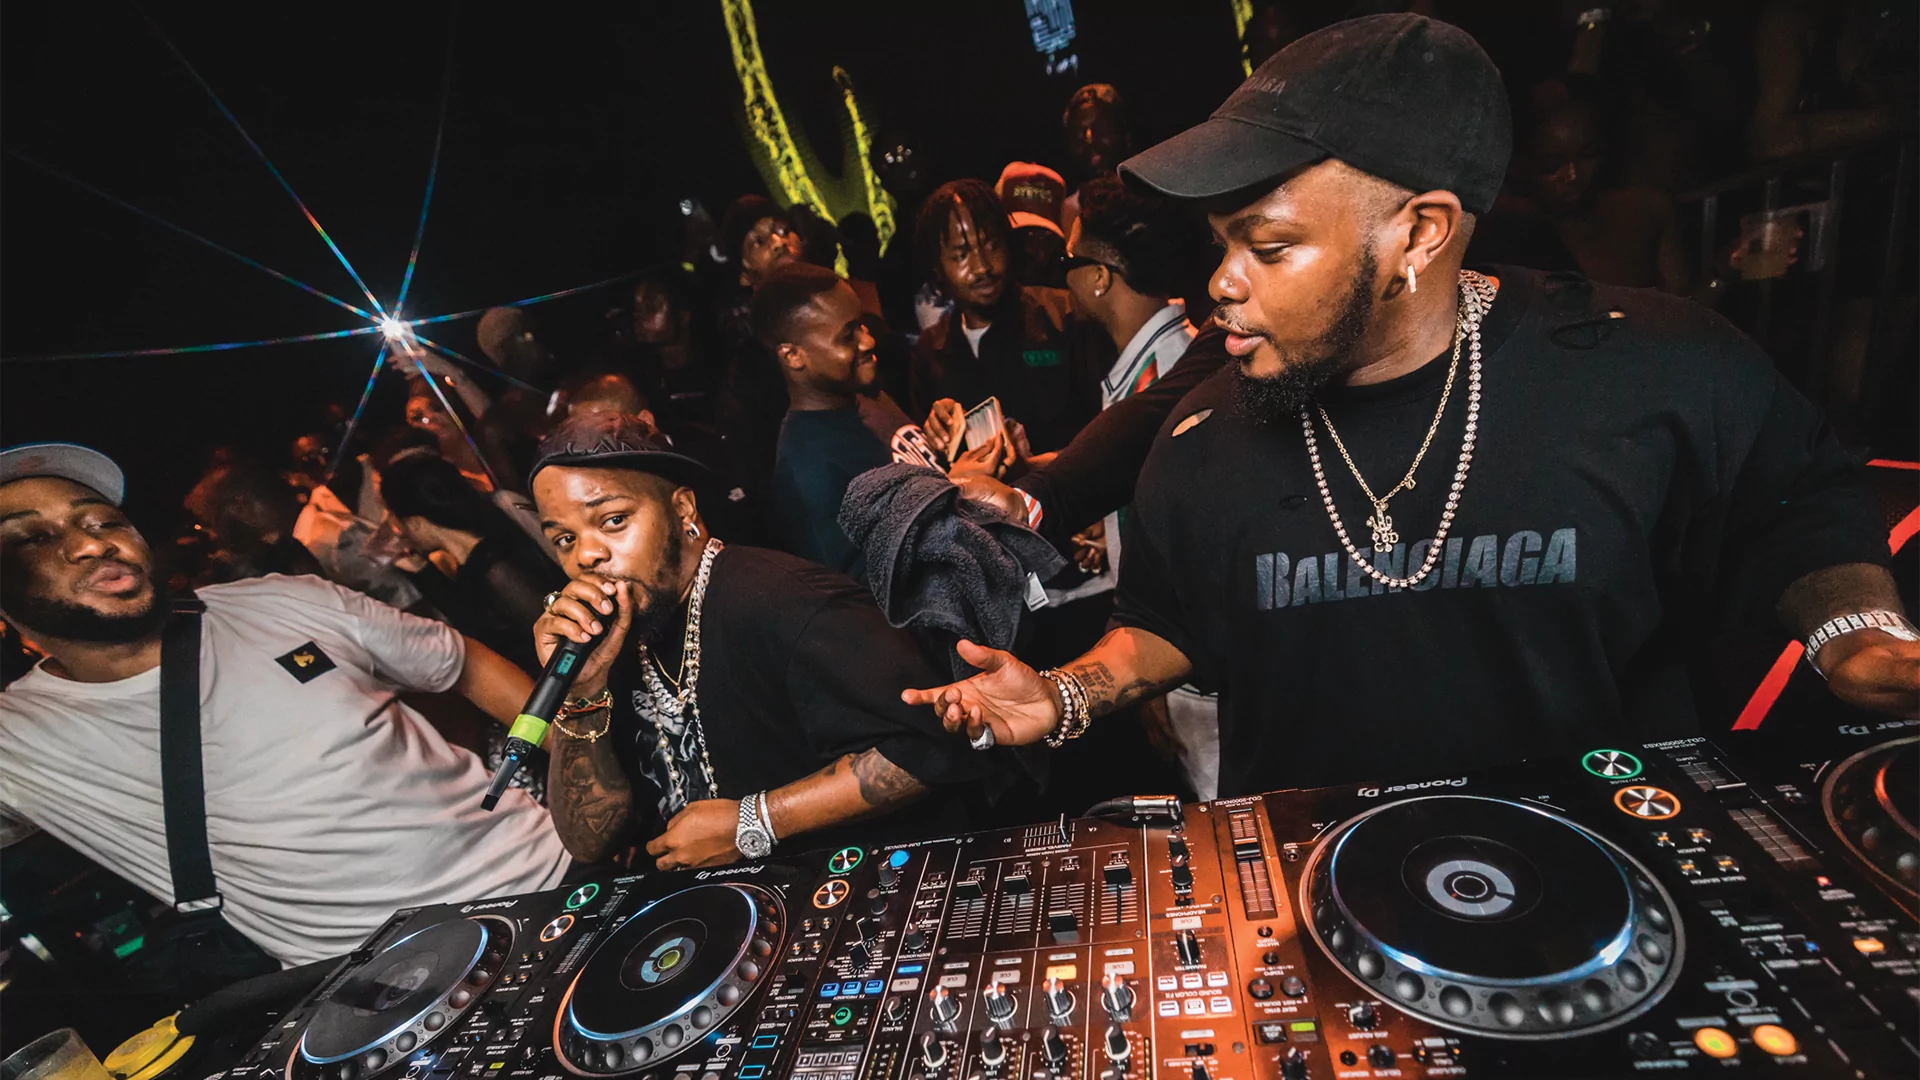 Photo of Major League Djz performing behind the decks in a busy club